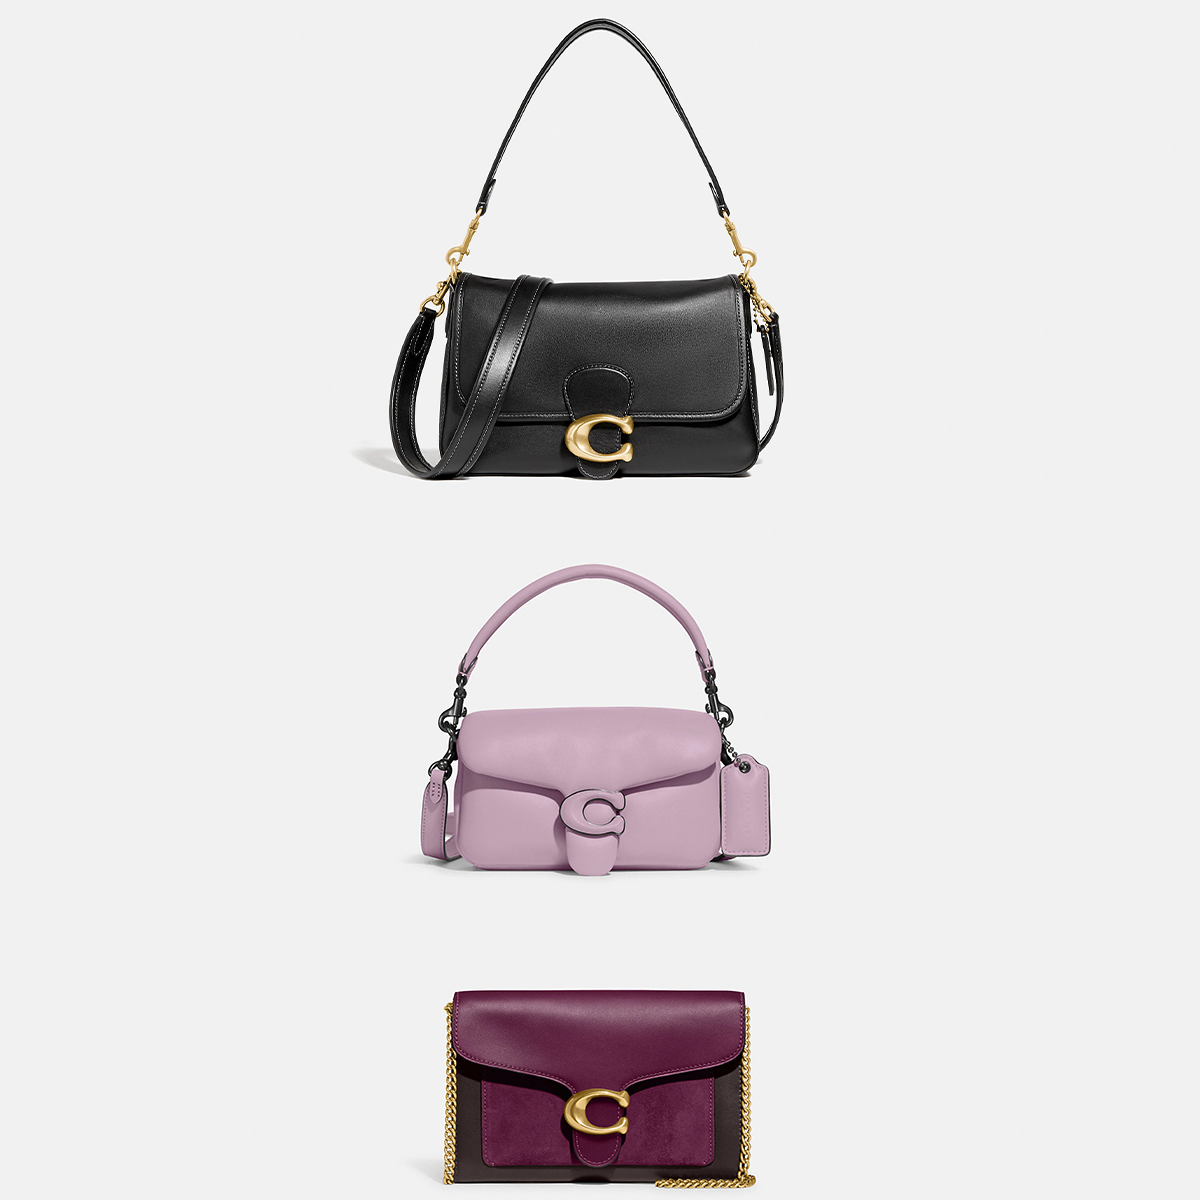 Coach items for 50% off: Affordable luxury bags, shoes